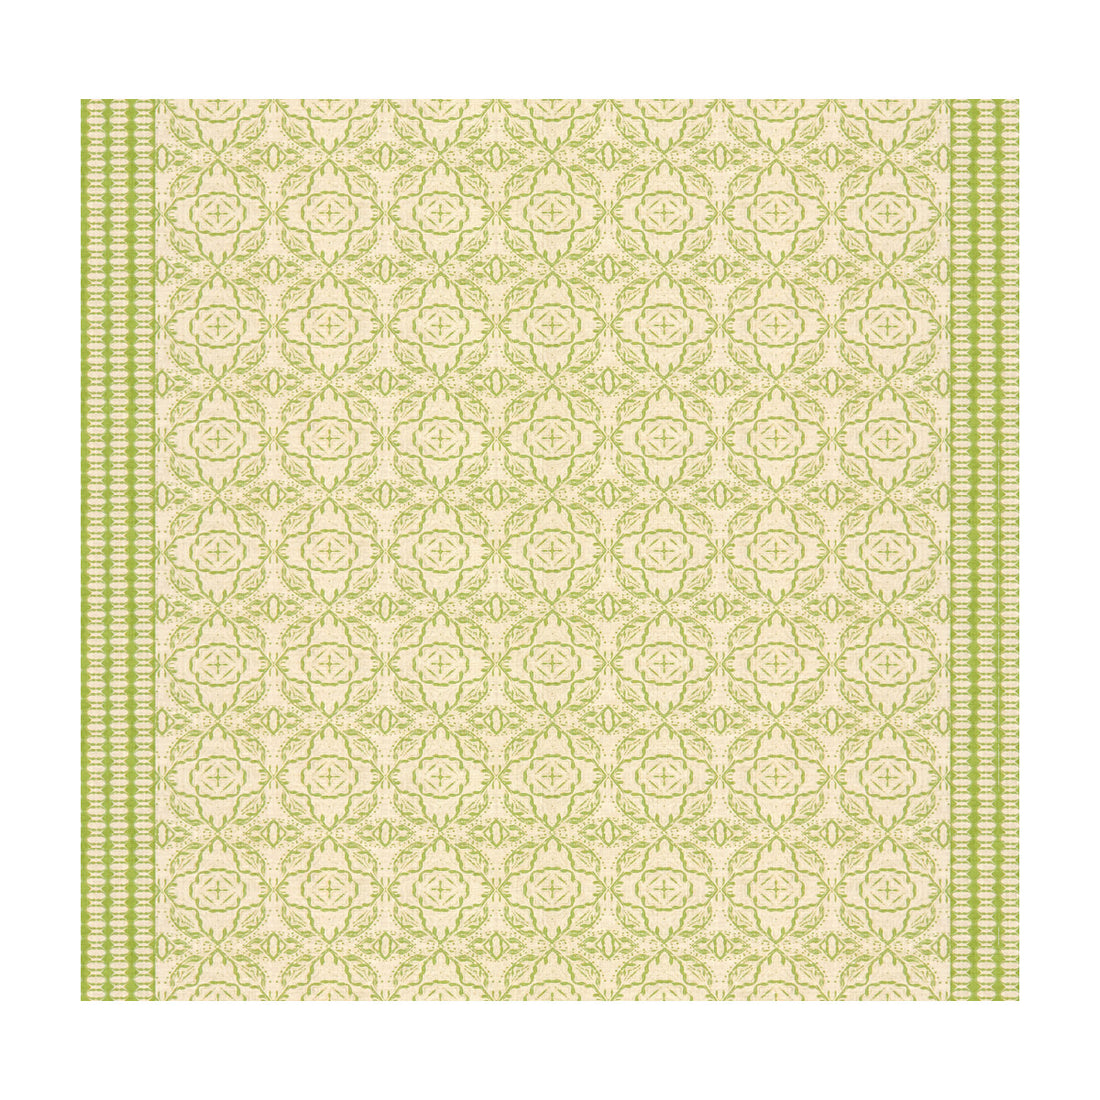 Maze fabric in meadow color - pattern GWF-3506.3.0 - by Lee Jofa Modern in the Allegra Hicks Garden collection